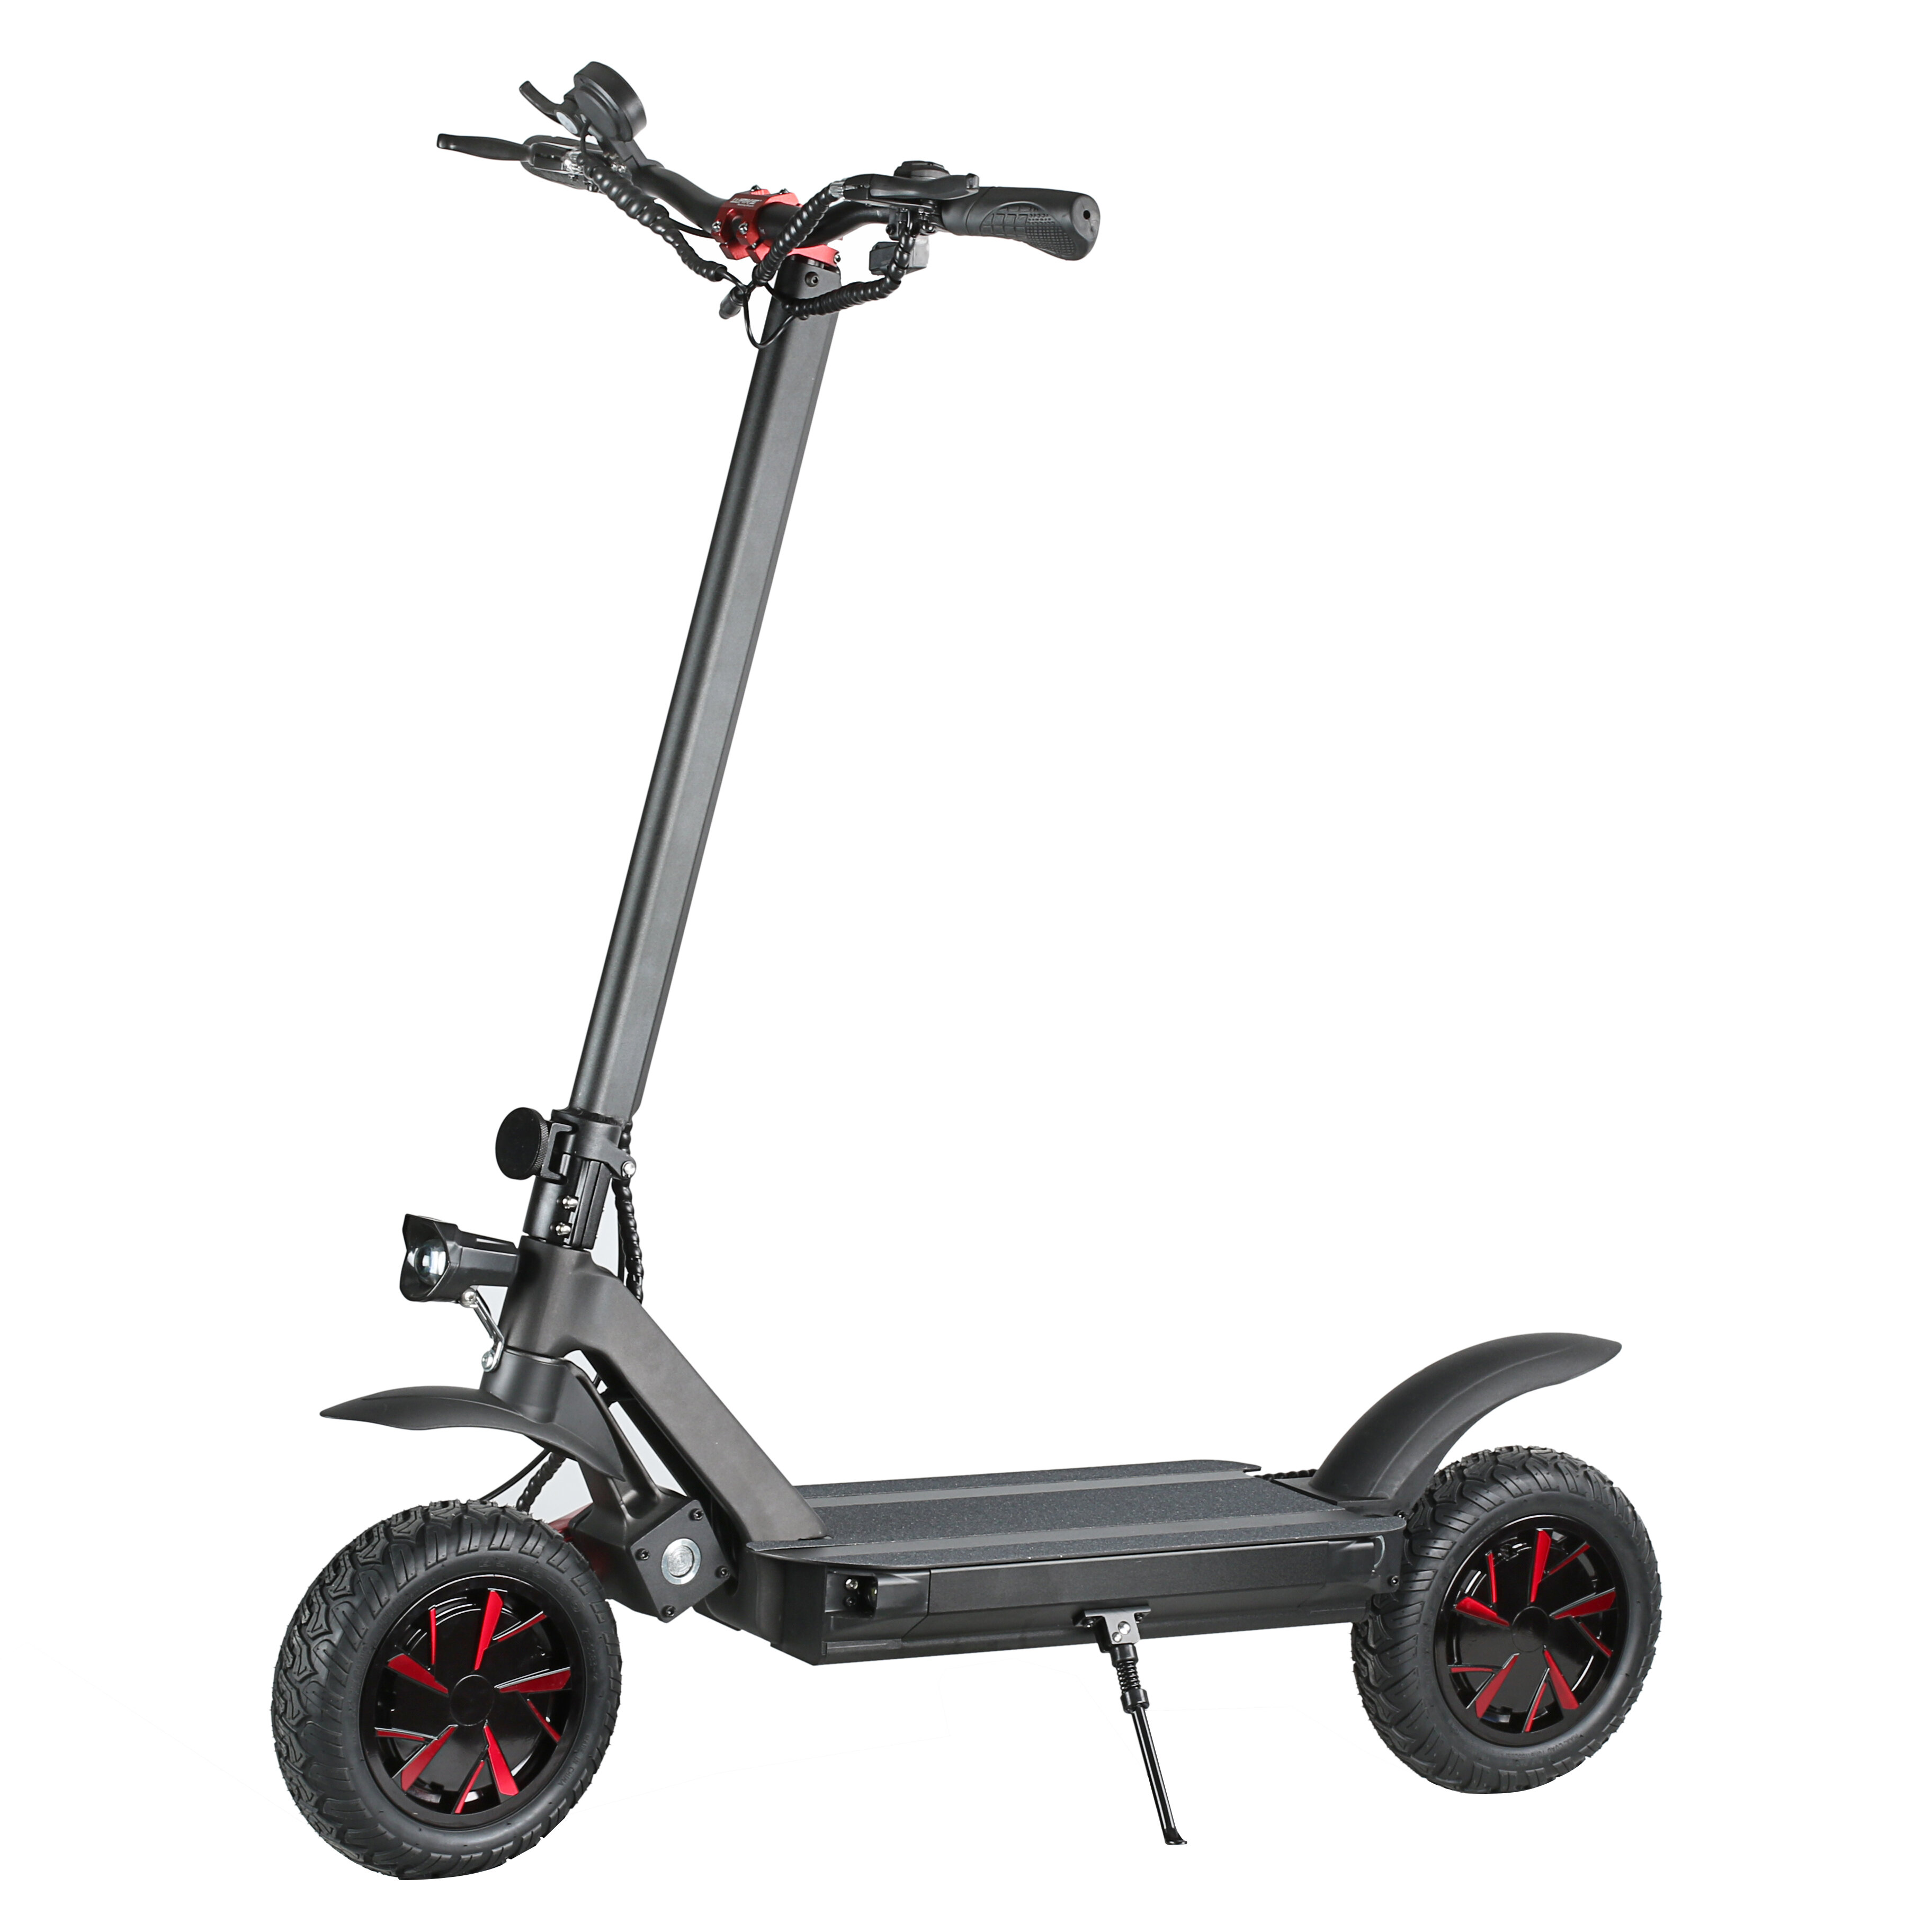 ESWING ESM8 60V 20.8Ah 3600W Dual Motor Folding Electric Scooter 70km/h Top Speed Max Load 150kg 11 inches Electric Scooter